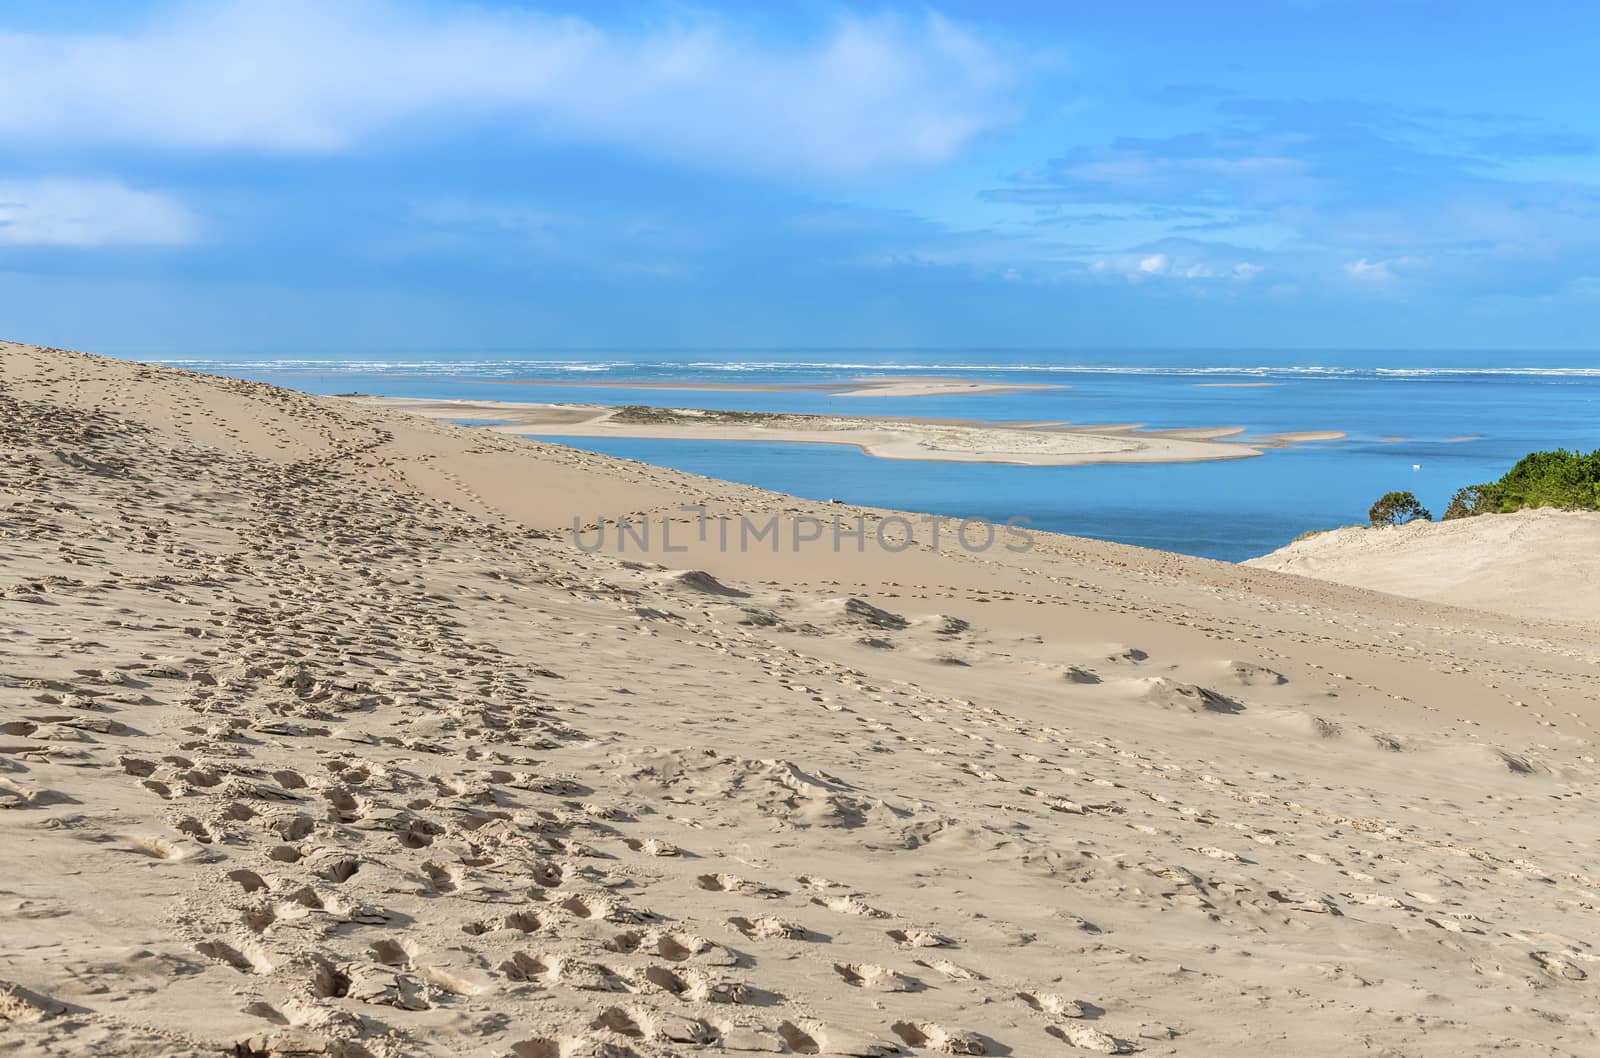 On the Pilat dune, located on the edge of the Landes de Gascogne forest massif on the Silver Coast at the entrance to the Arcachon basin, in France, is the highest dune in Europe.